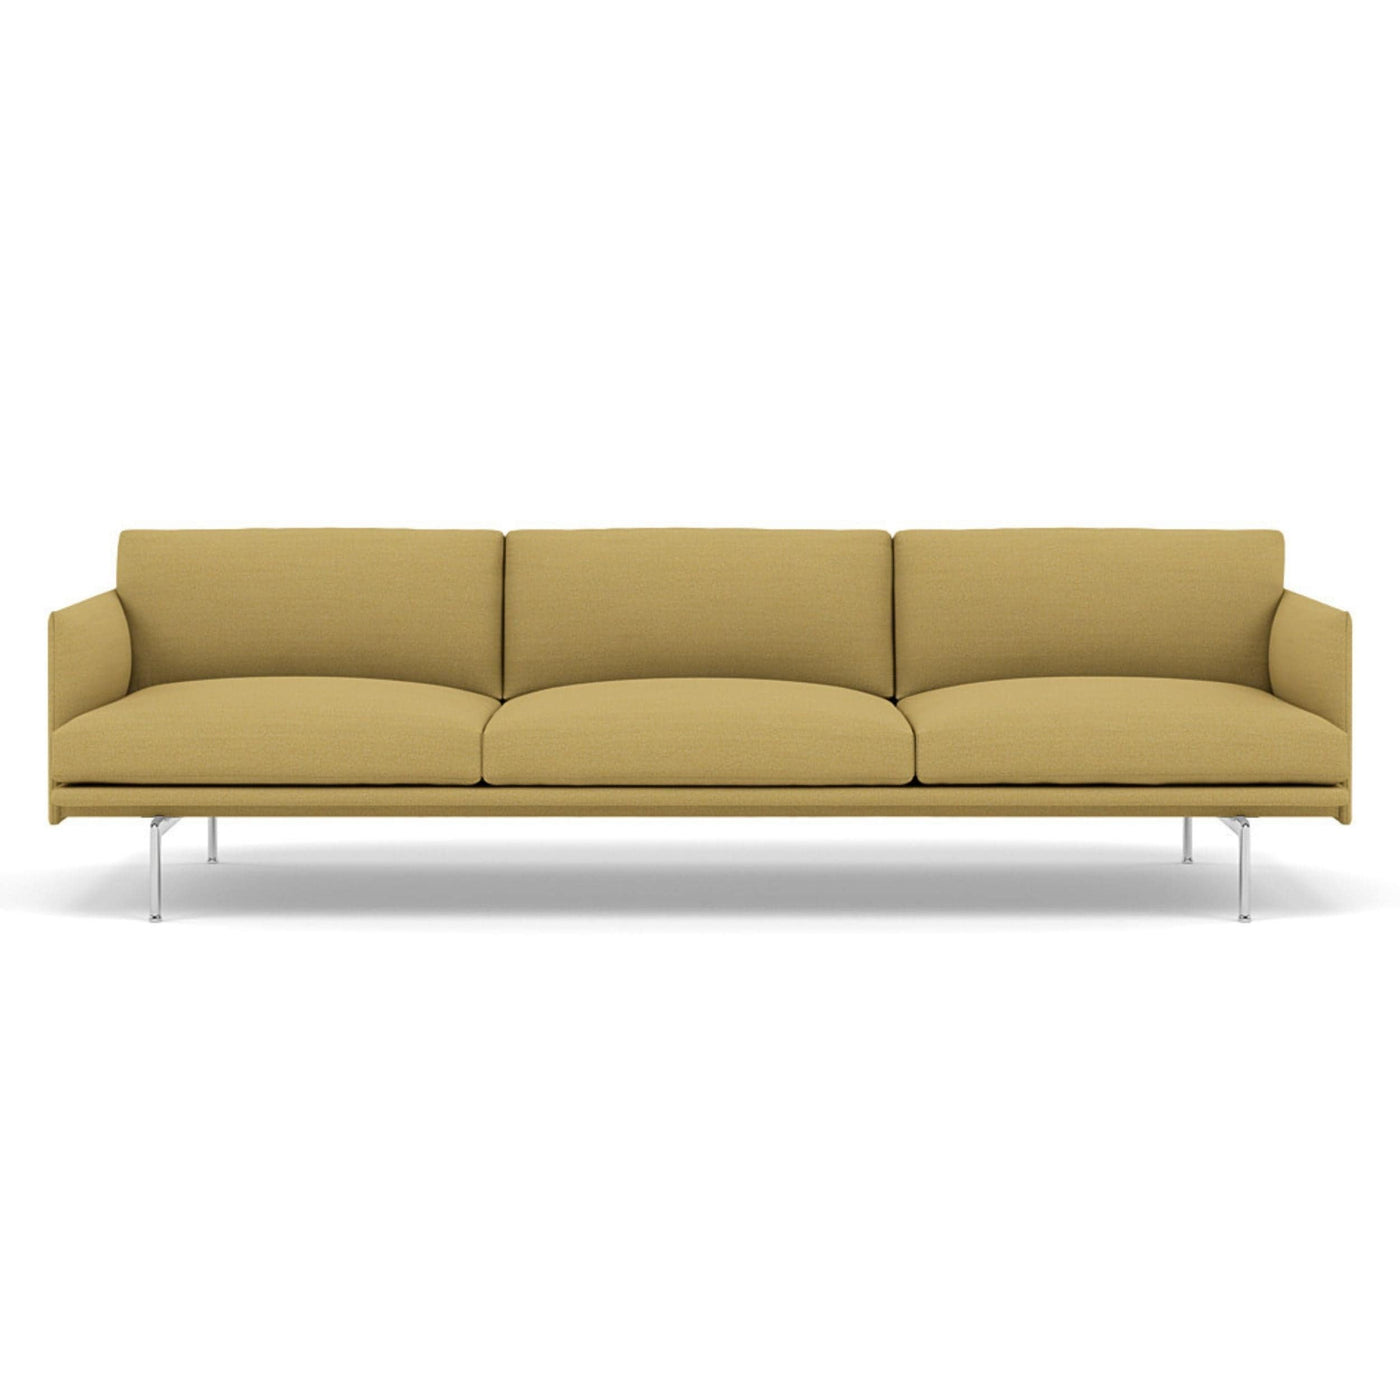 muuto outline 3.5 seater sofa in hallingdal 407 yellow and polished aluminium legs. Made to order from someday designs. #colour_hallingdal-407